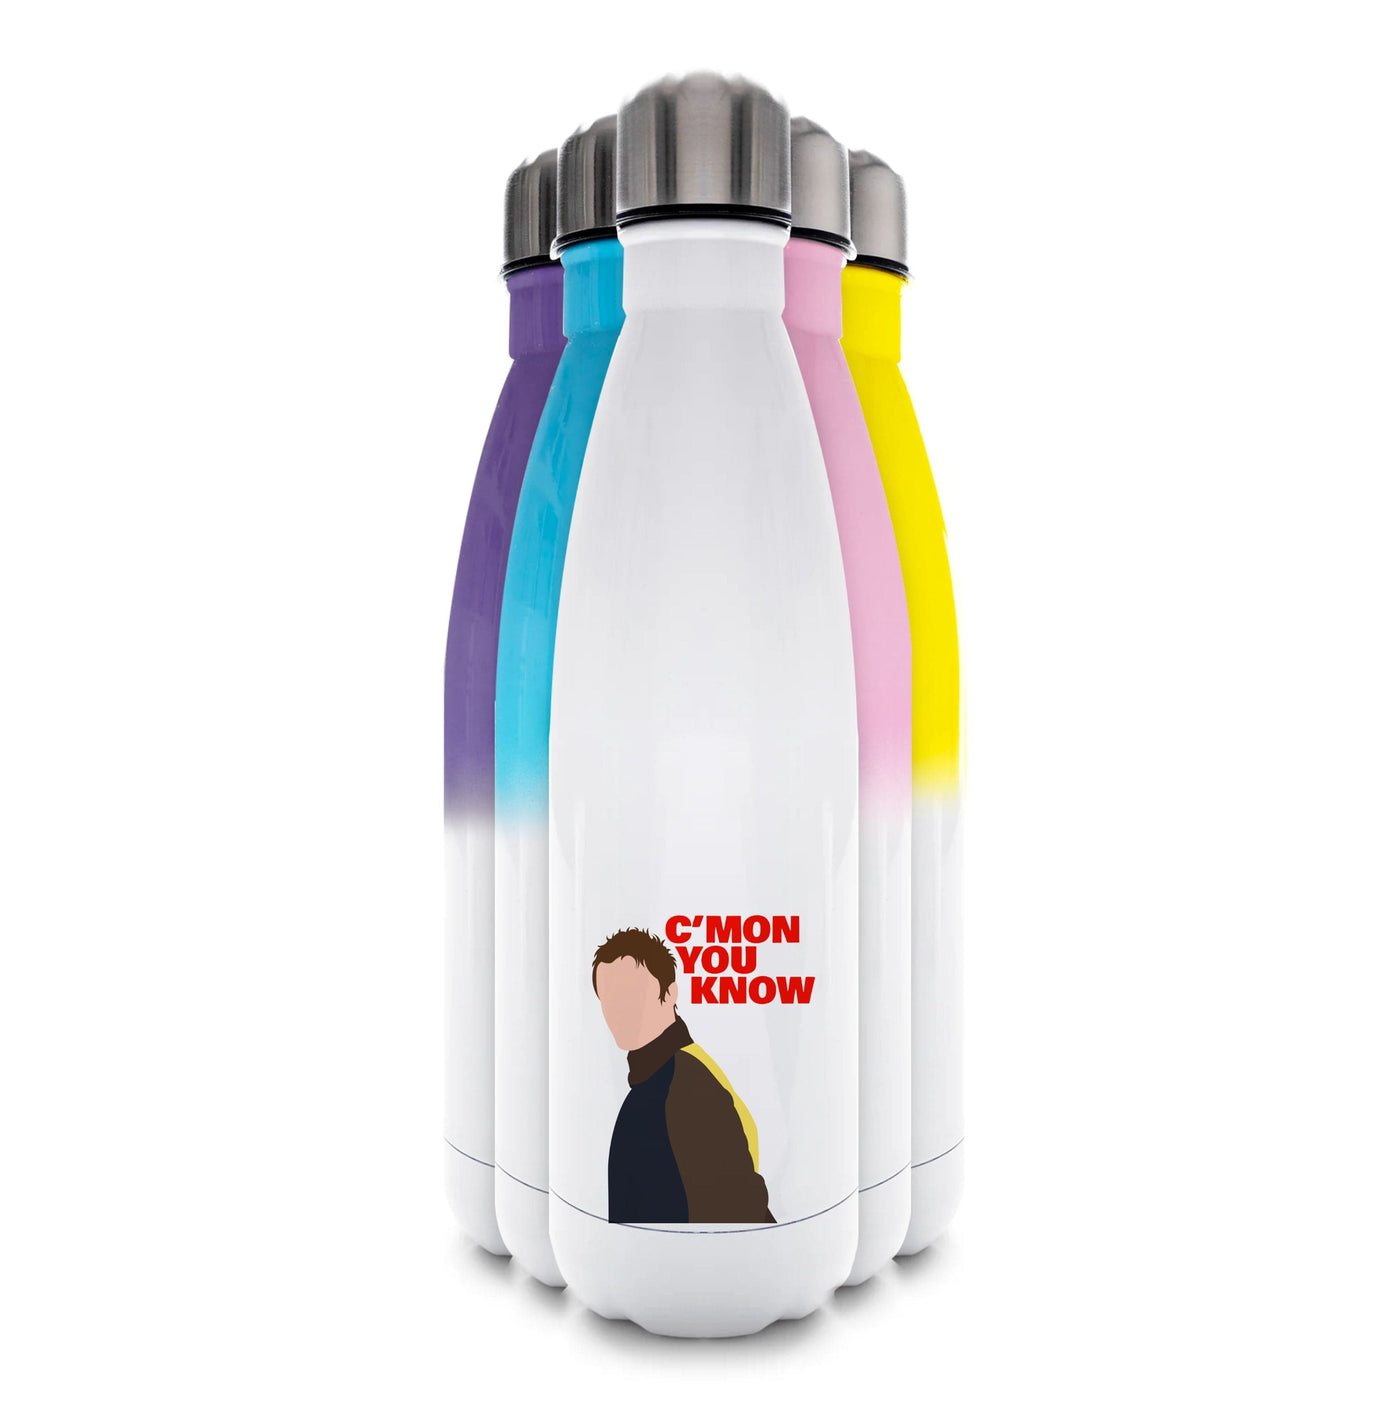 C'mon You Know - Festival Water Bottle